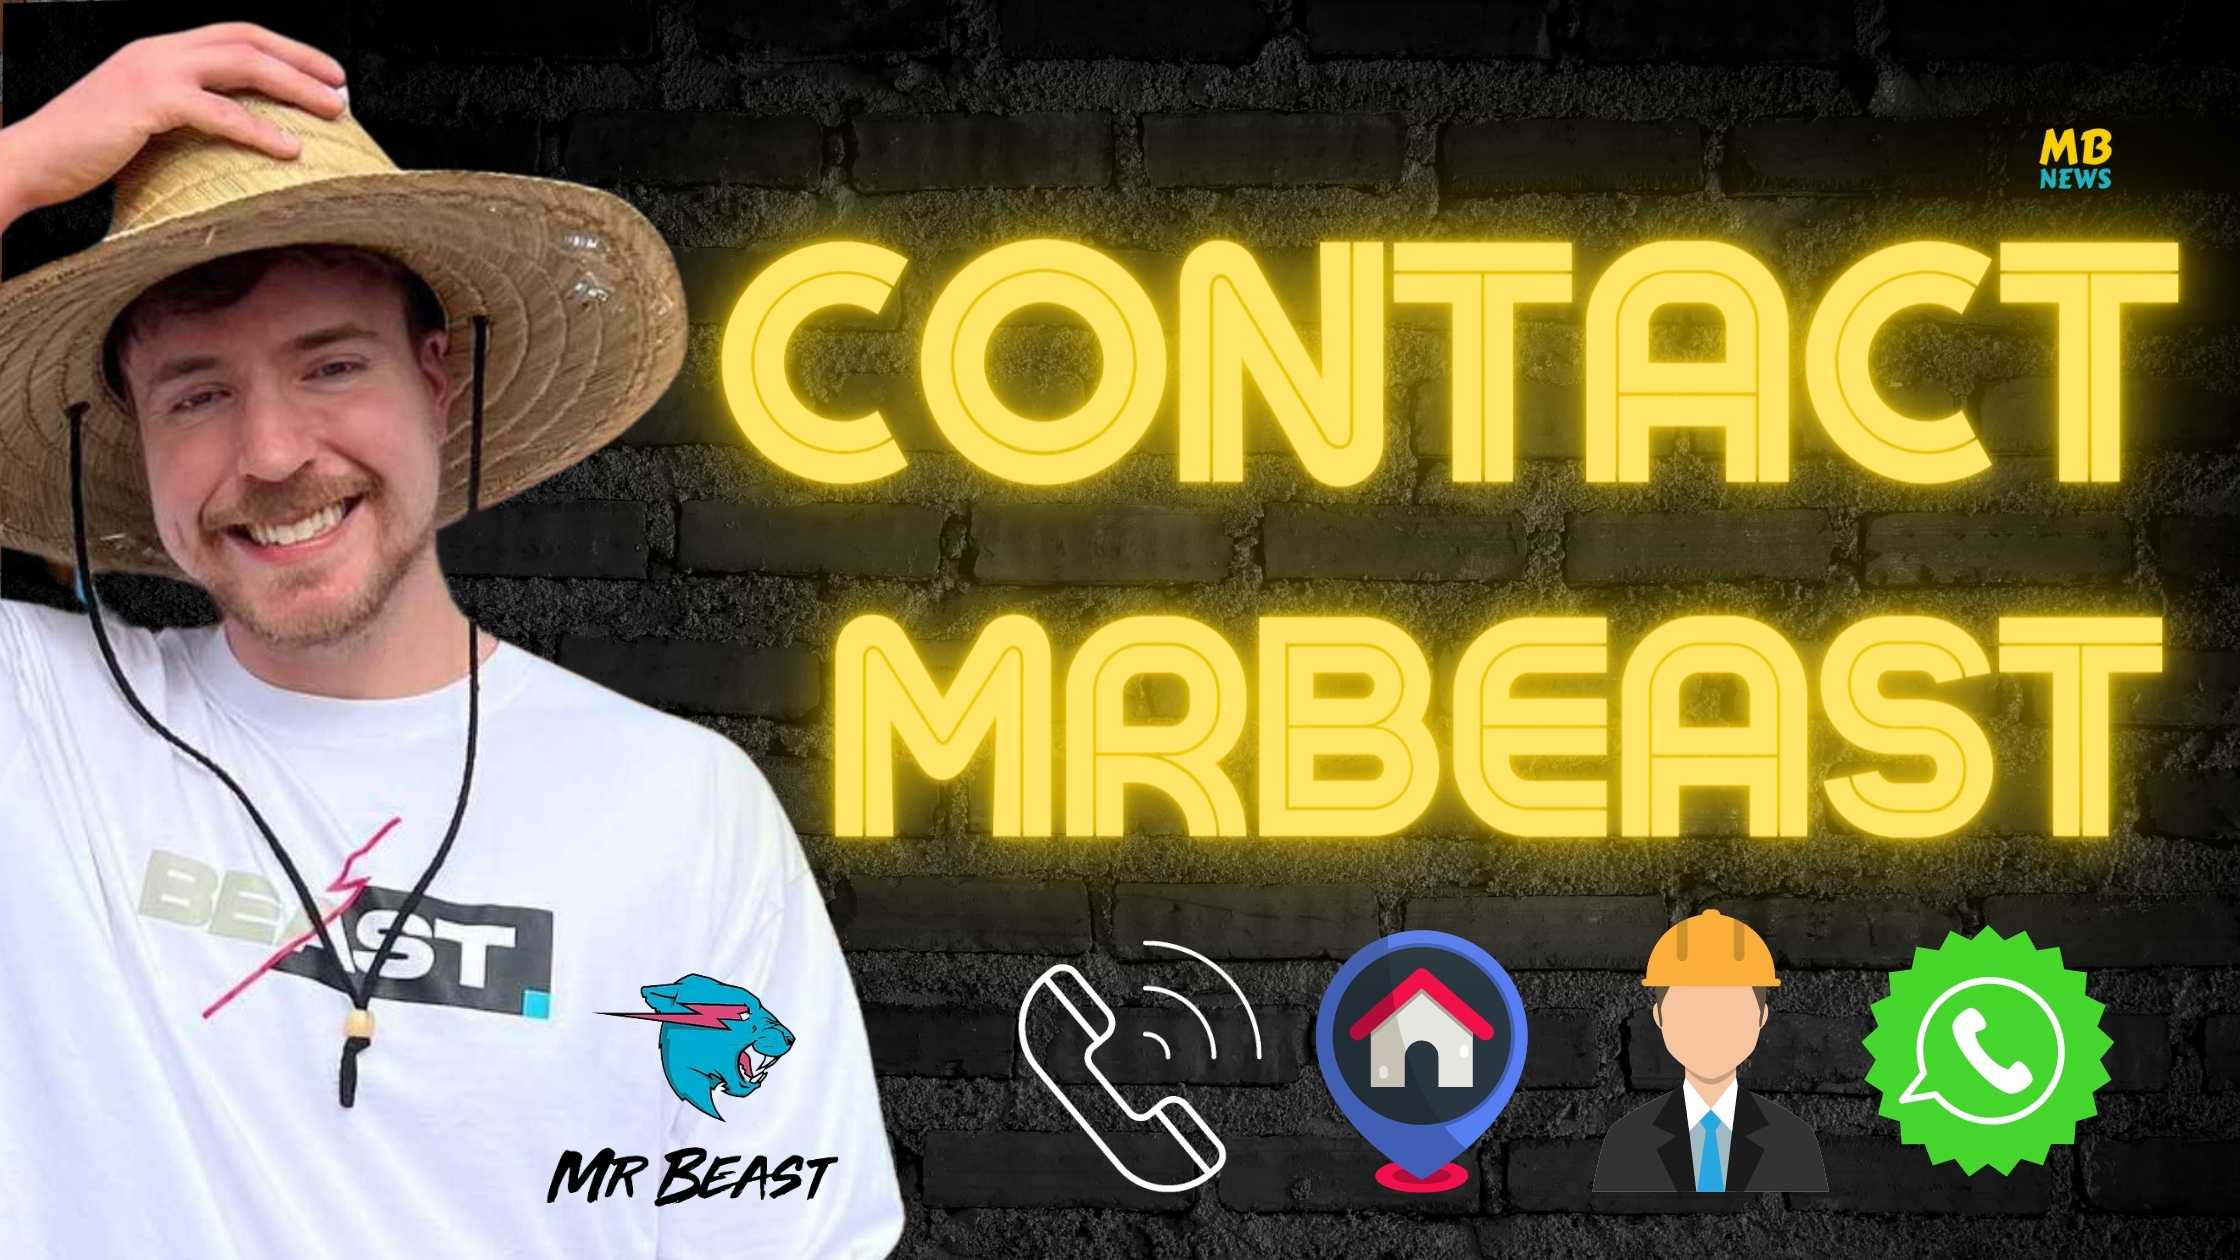 how to contact mrbeast via mobile number, whatsapp number, email address, home address all details